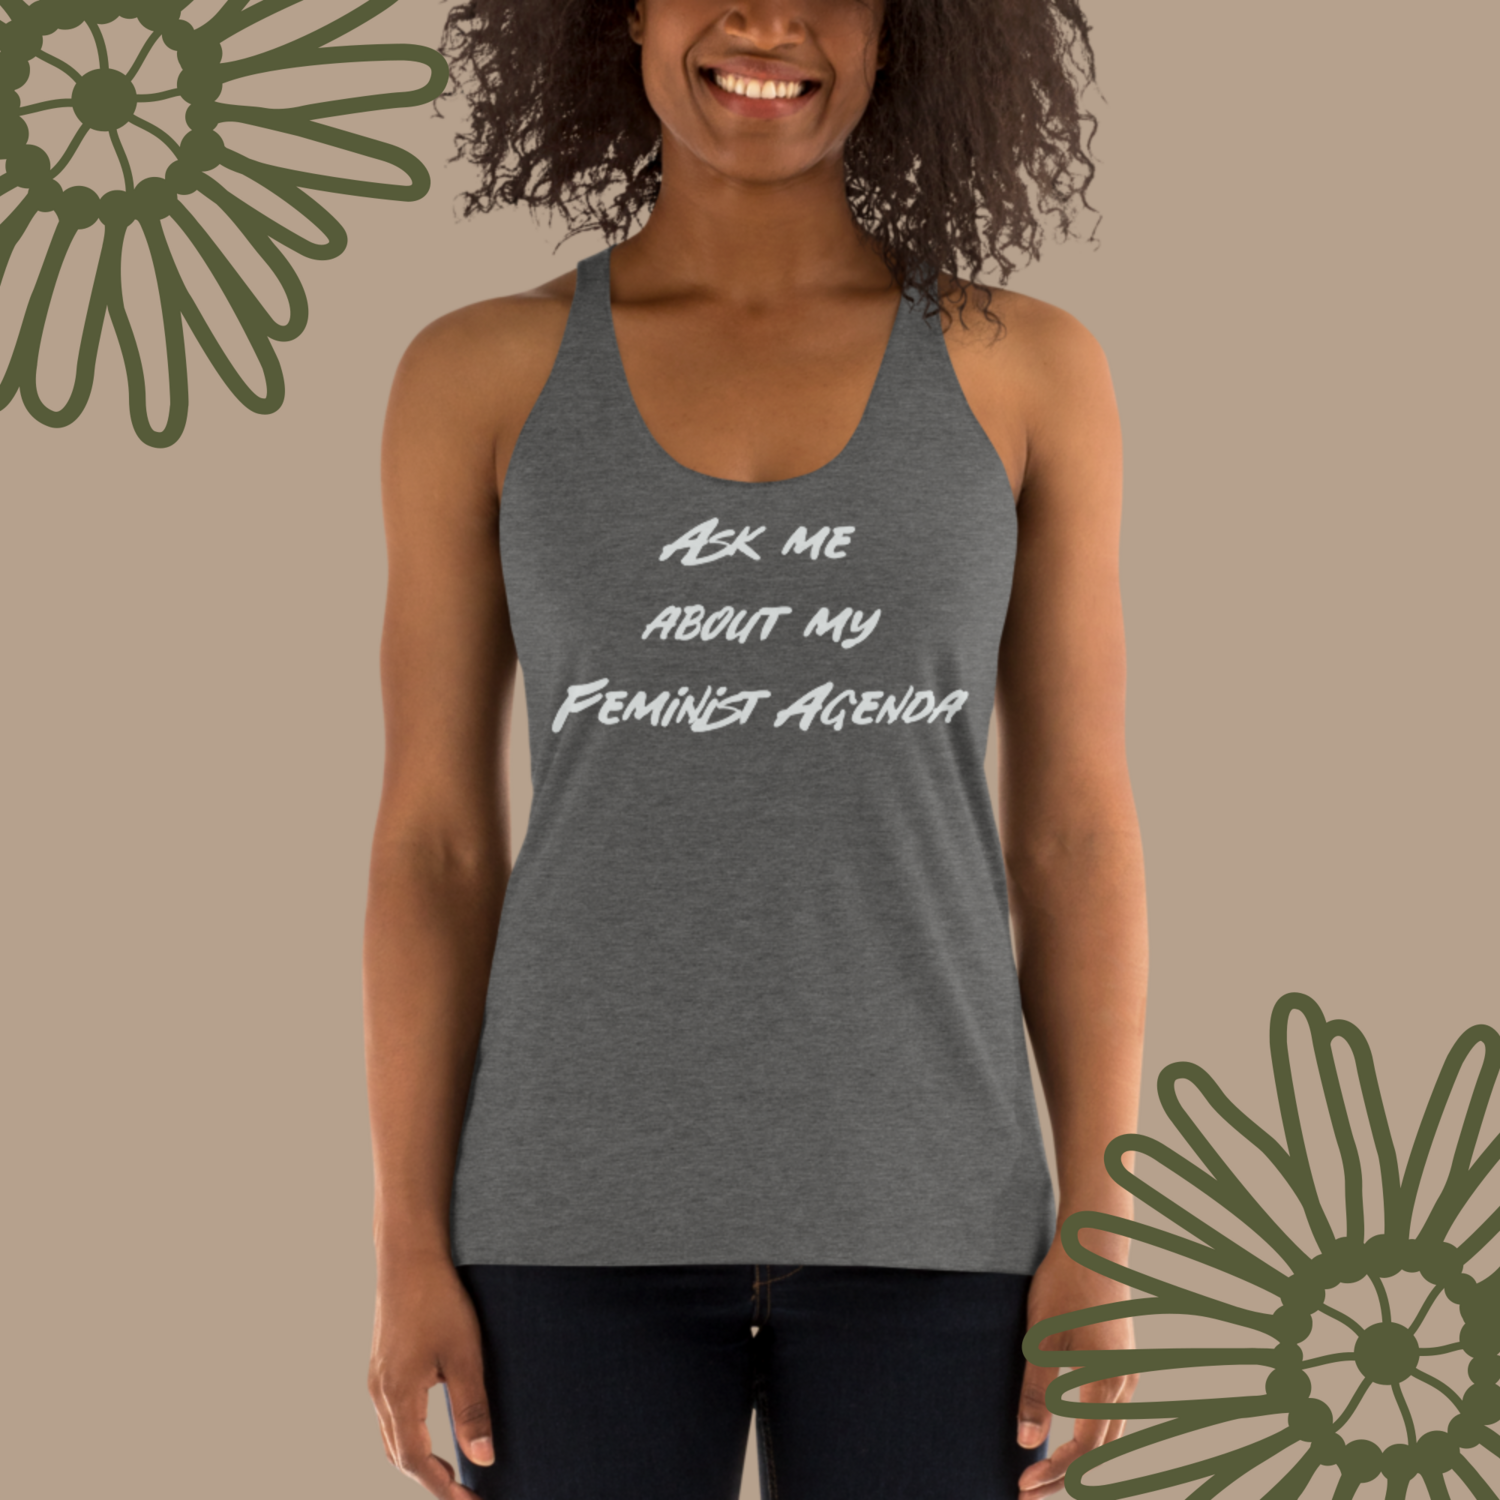 Ask Me About My Feminist Agenda Racerback Tank